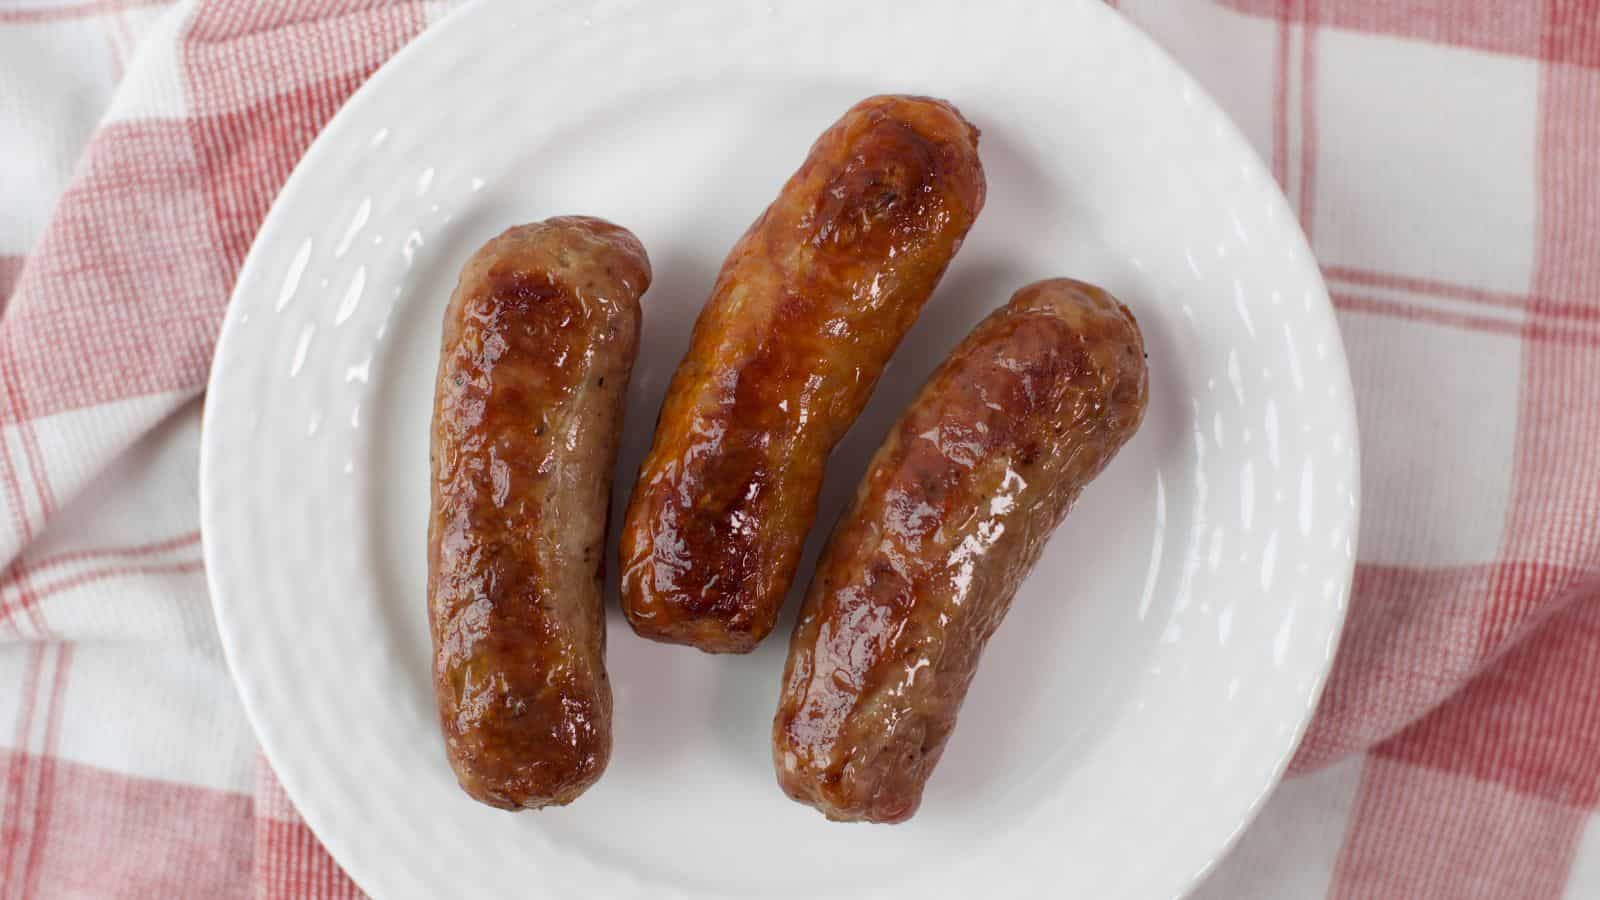 Three oven-baked sausages on a white plate with a red and white checkered napkin in the background.